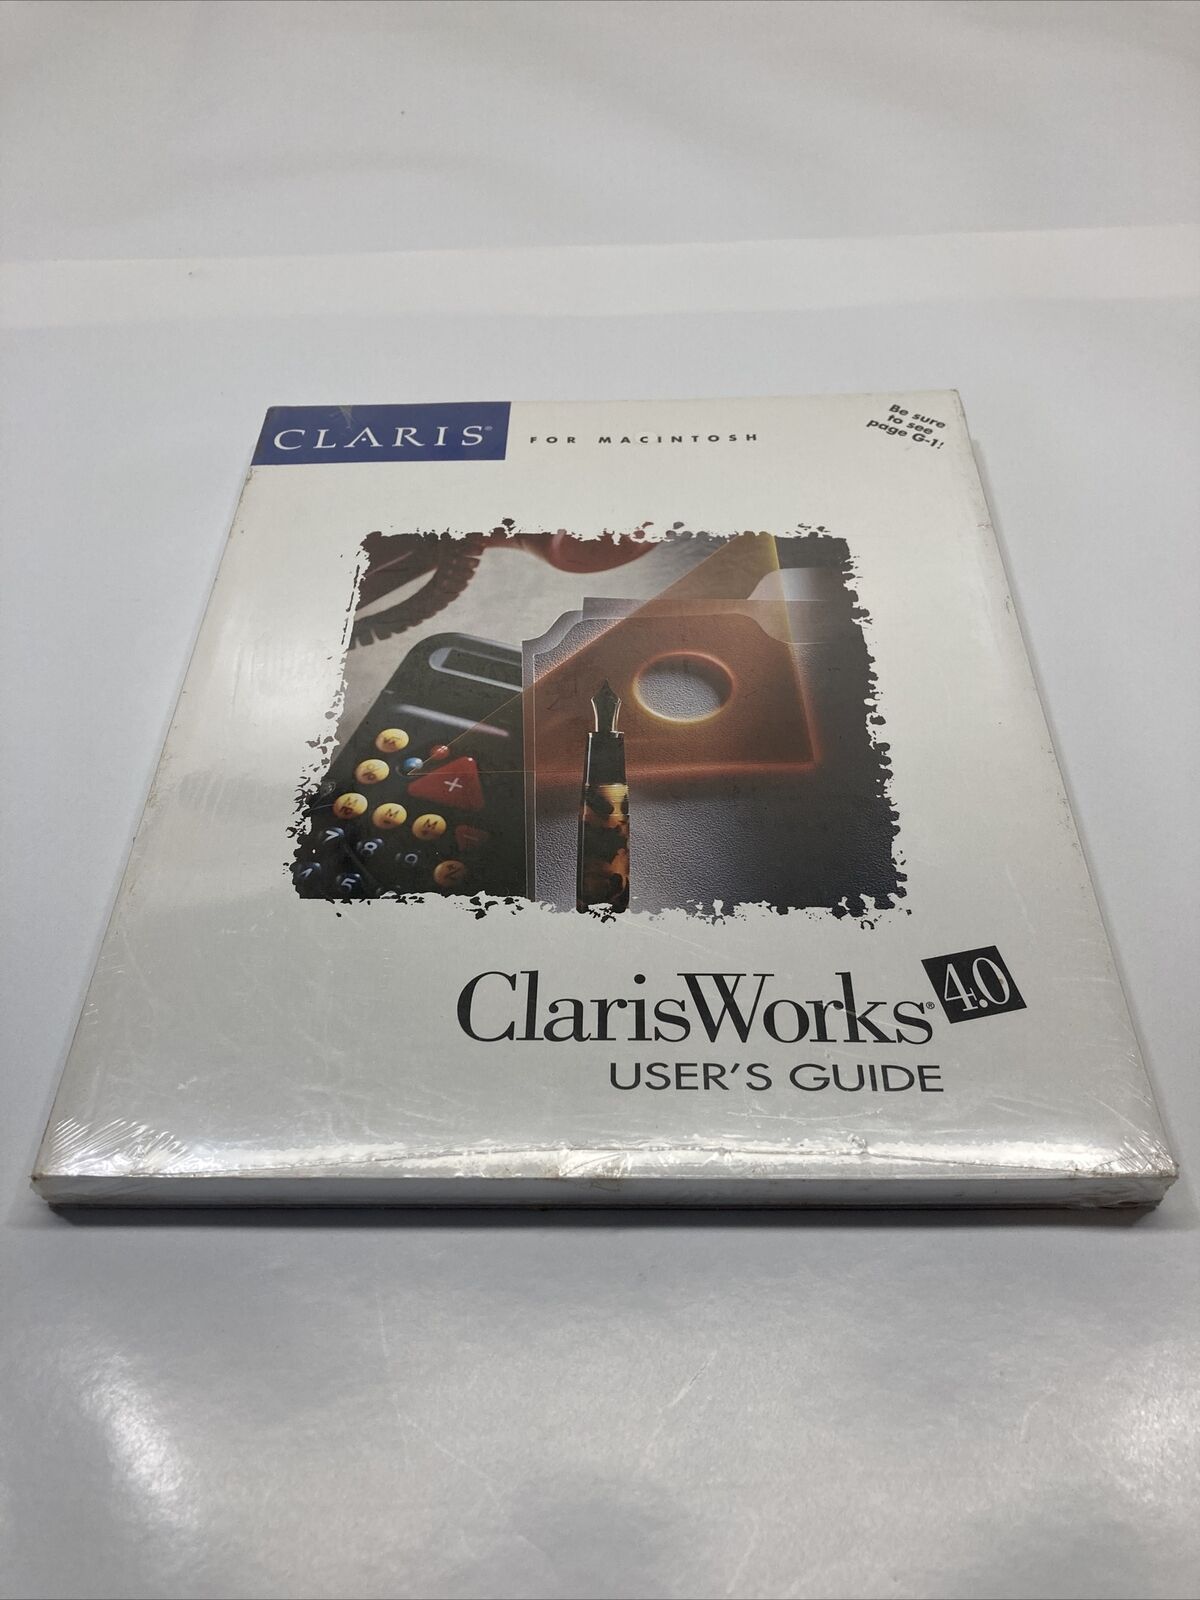 Sealed Claris Works User's Guide 4.0 for Macintosh